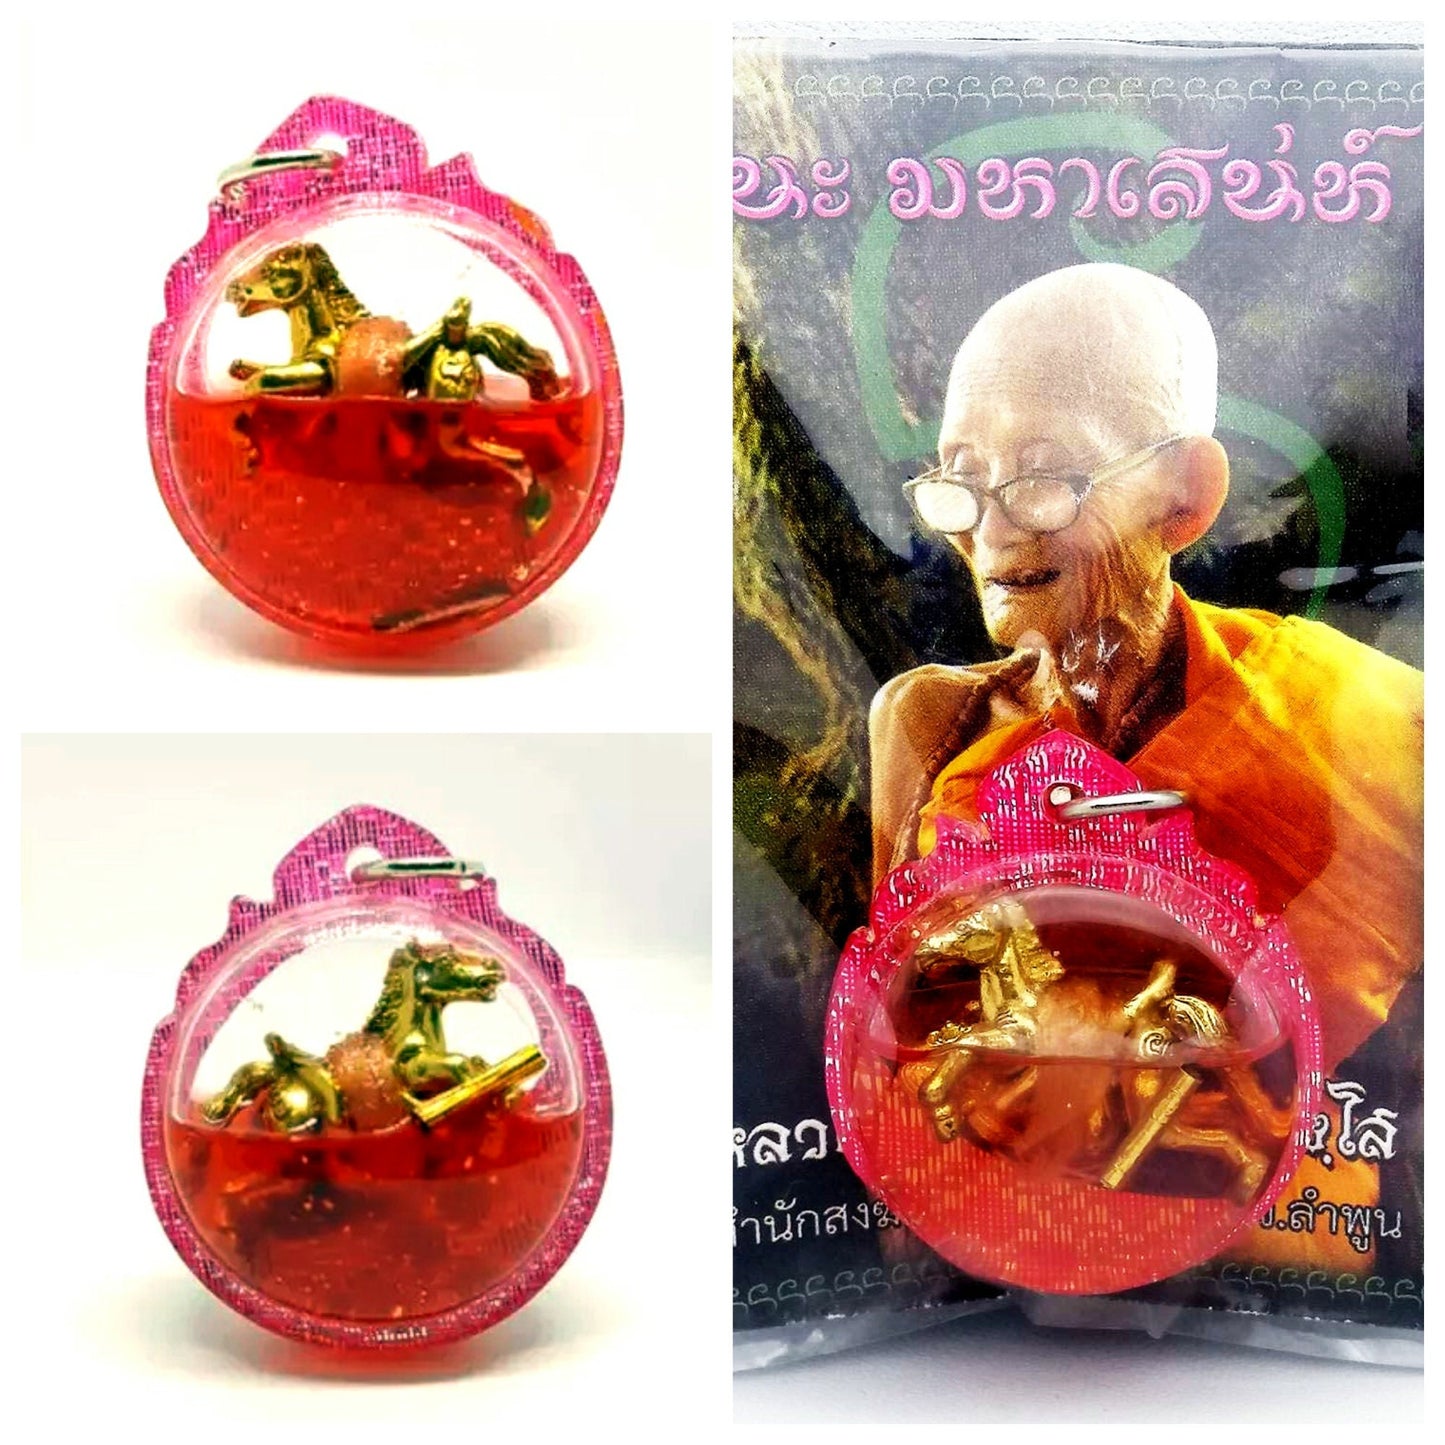 Ma sep nang Powerful Magic Pendant Sexual allure-Sexual Magnetism In Charming Oil By Lp Kruba Na